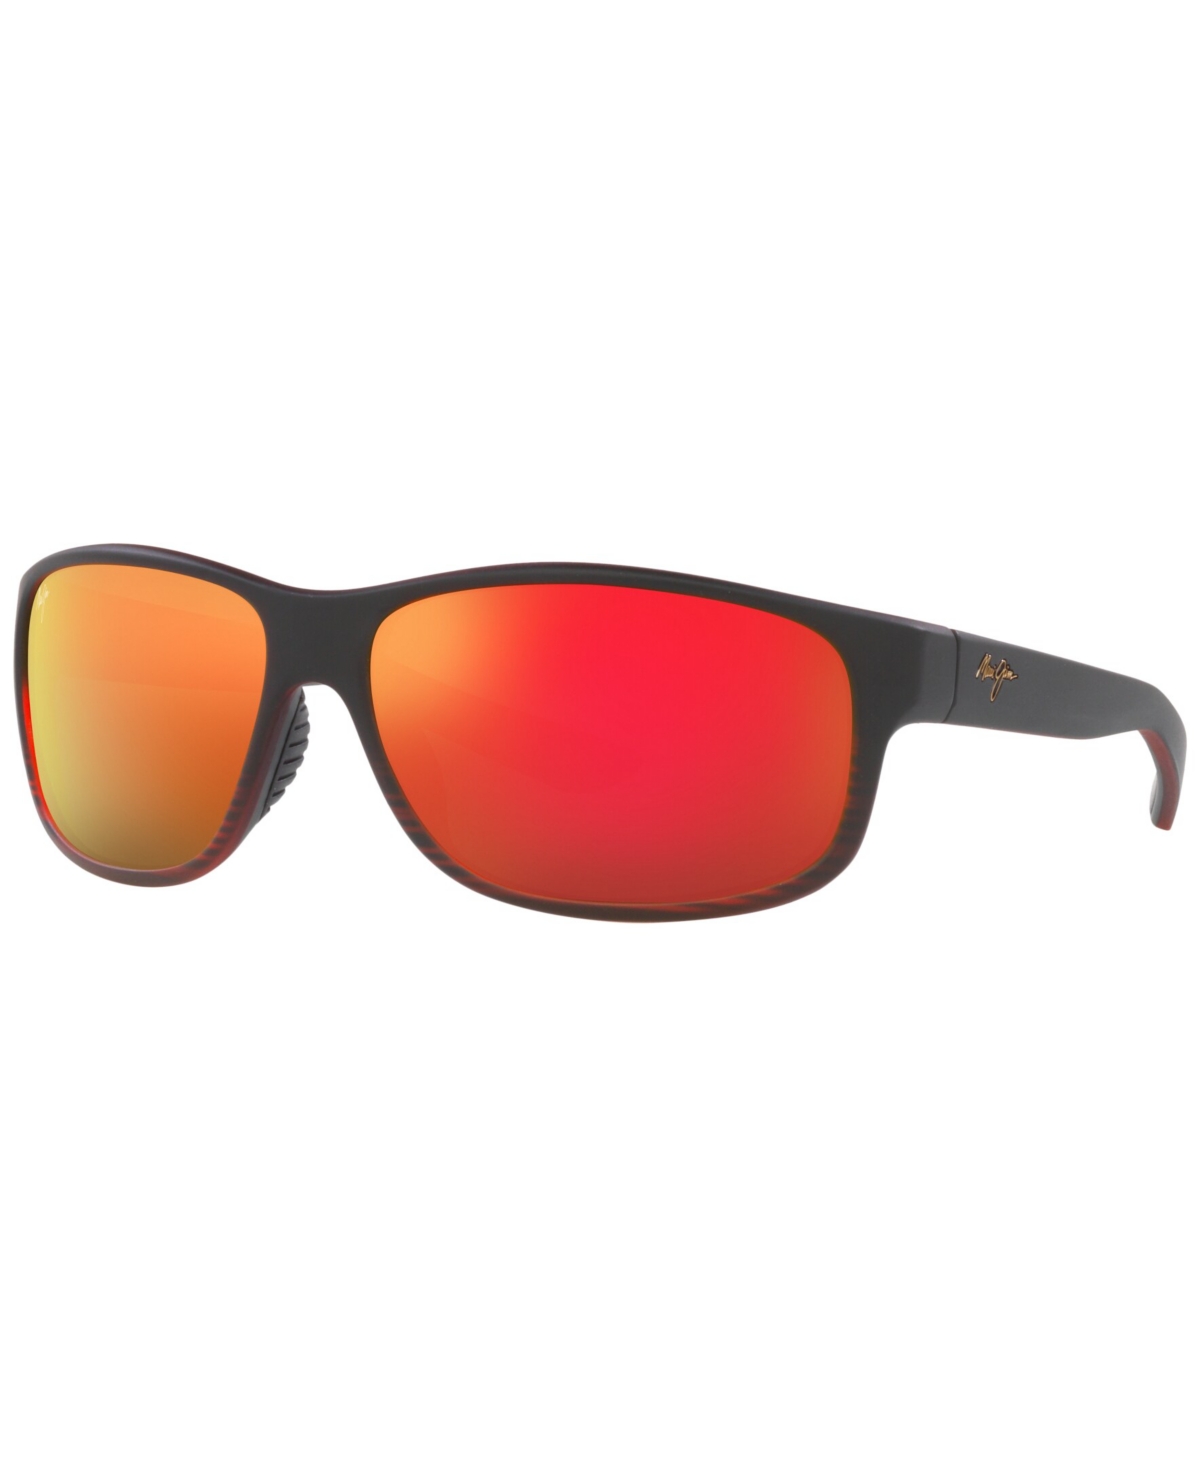 Shop Maui Jim Unisex Polarized Sunglasses, Kaiwi Channel 62 In Red